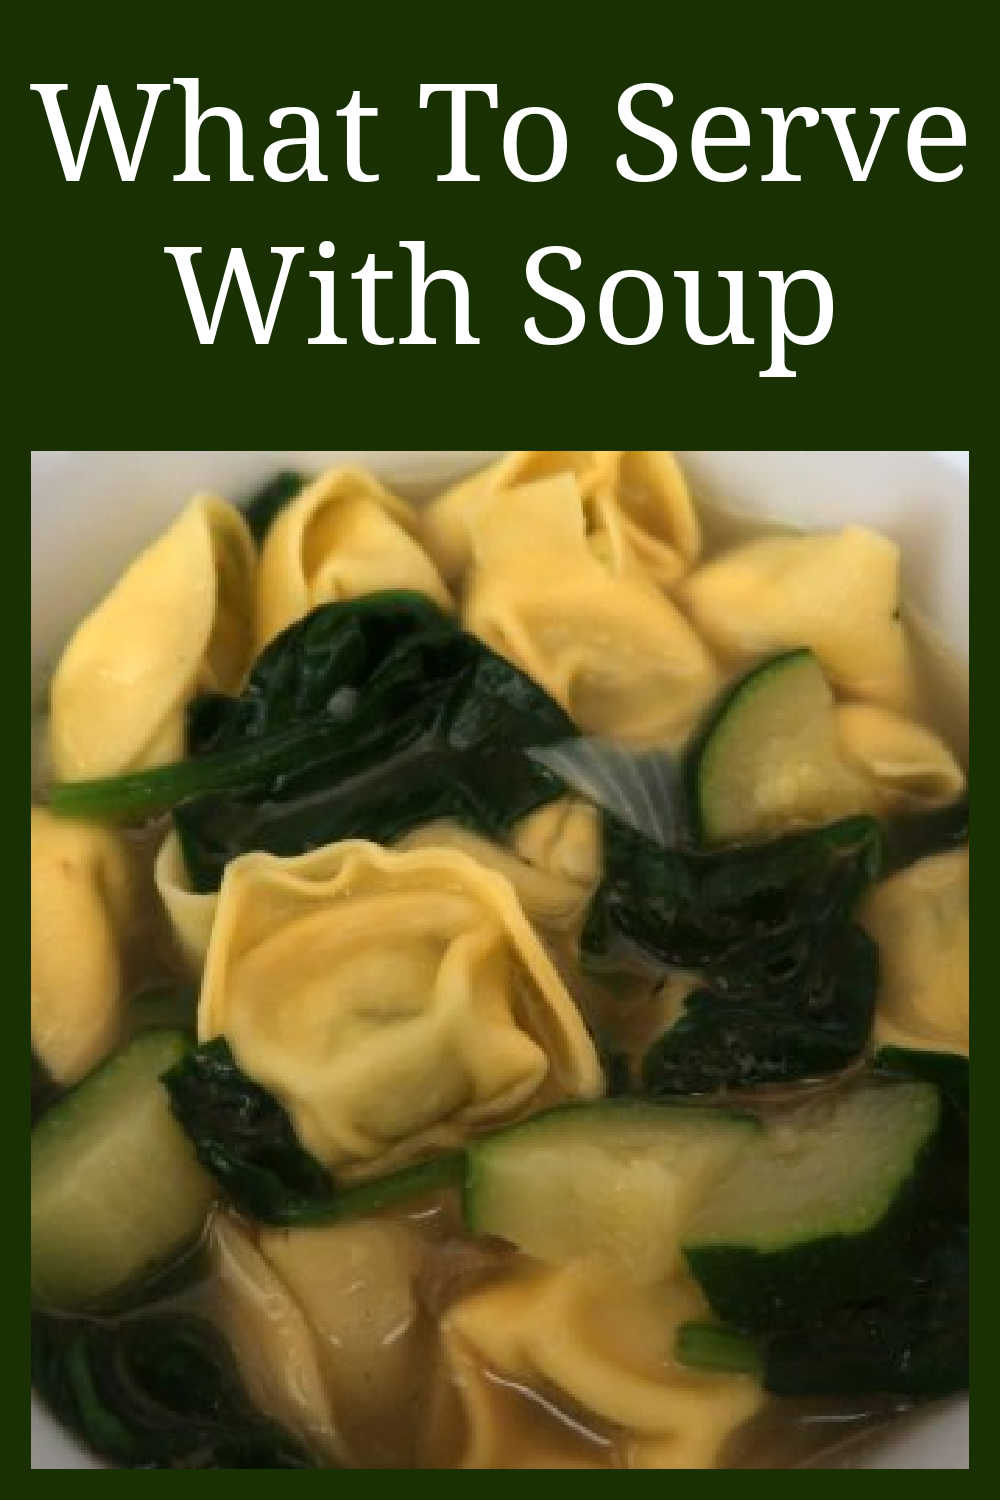 What To Serve With Soup - The best ideas for quick and easy sides to make to turn soup into the perfect comfort food main course, dinner or meal.